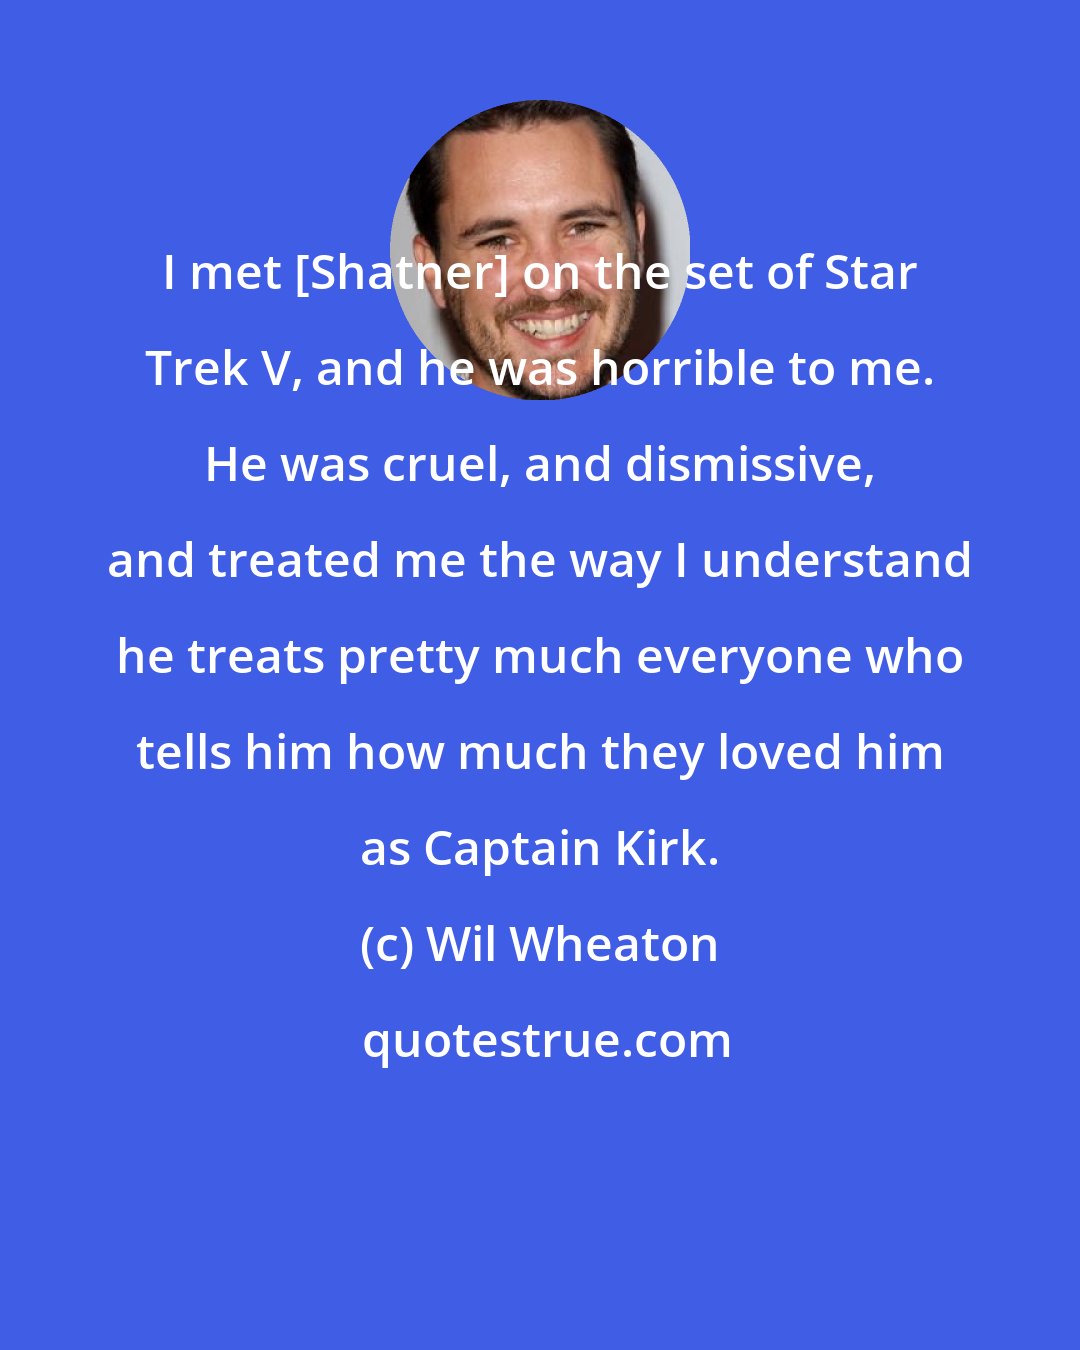 Wil Wheaton: I met [Shatner] on the set of Star Trek V, and he was horrible to me. He was cruel, and dismissive, and treated me the way I understand he treats pretty much everyone who tells him how much they loved him as Captain Kirk.